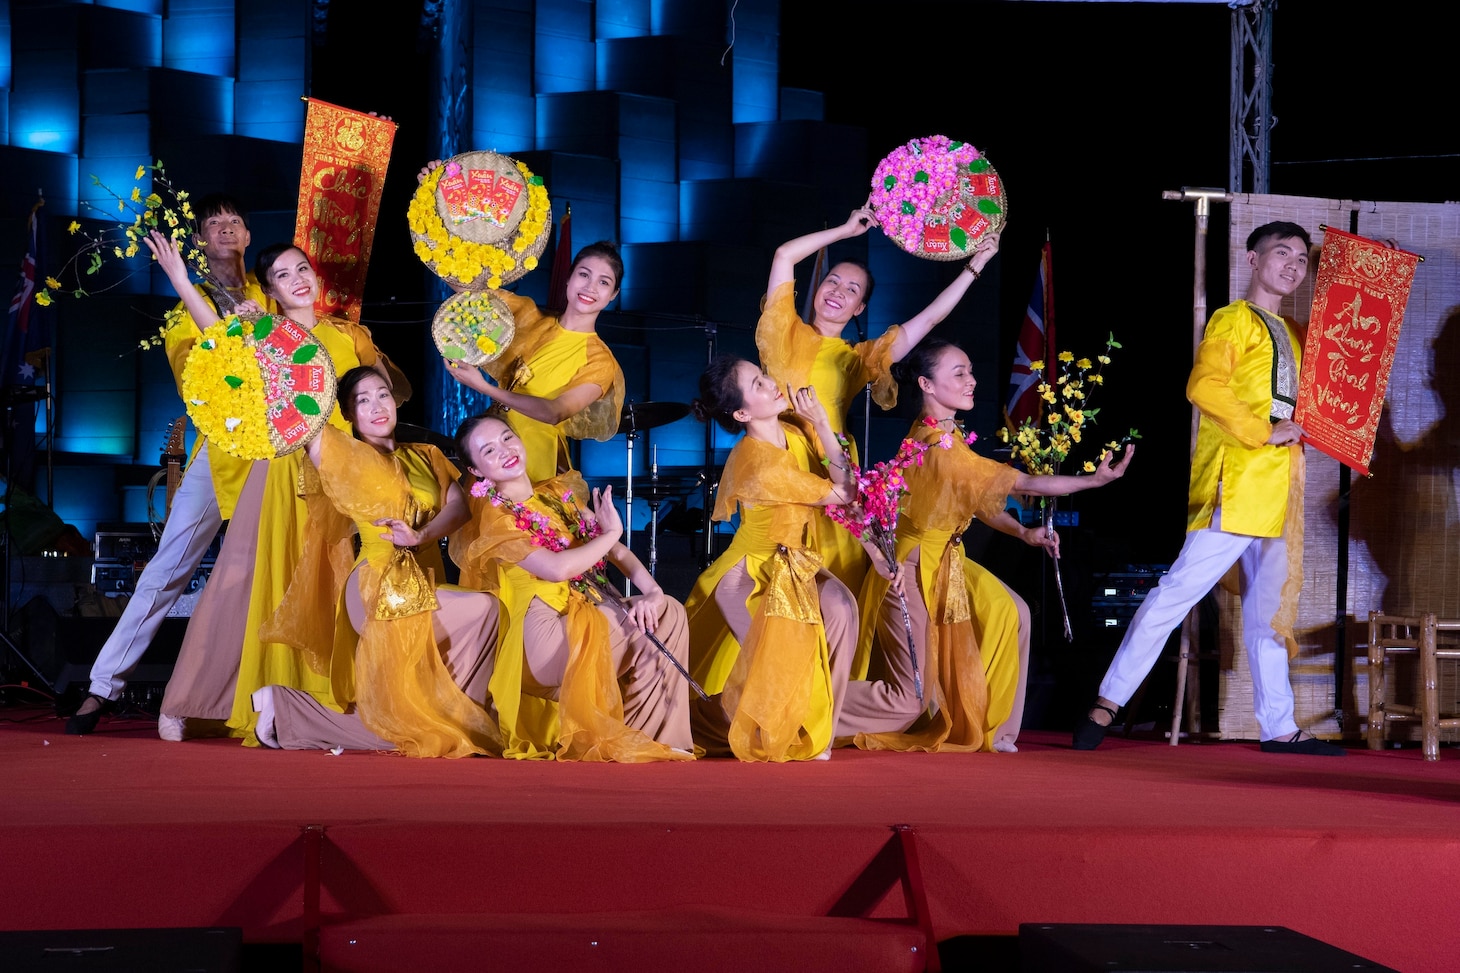 PHU YEN, Vietnam (June 20, 2022) – Vietnamese cultural performers dance during the Pacific Partnership Vietnam opening ceremony. Now in its 17th year, Pacific Partnership is the largest annual multinational humanitarian assistance and disaster relief preparedness mission conducted in the Indo-Pacific. (U.S. Navy photo by Mass Communication Specialist 2nd Class Brandie Nuzzi)